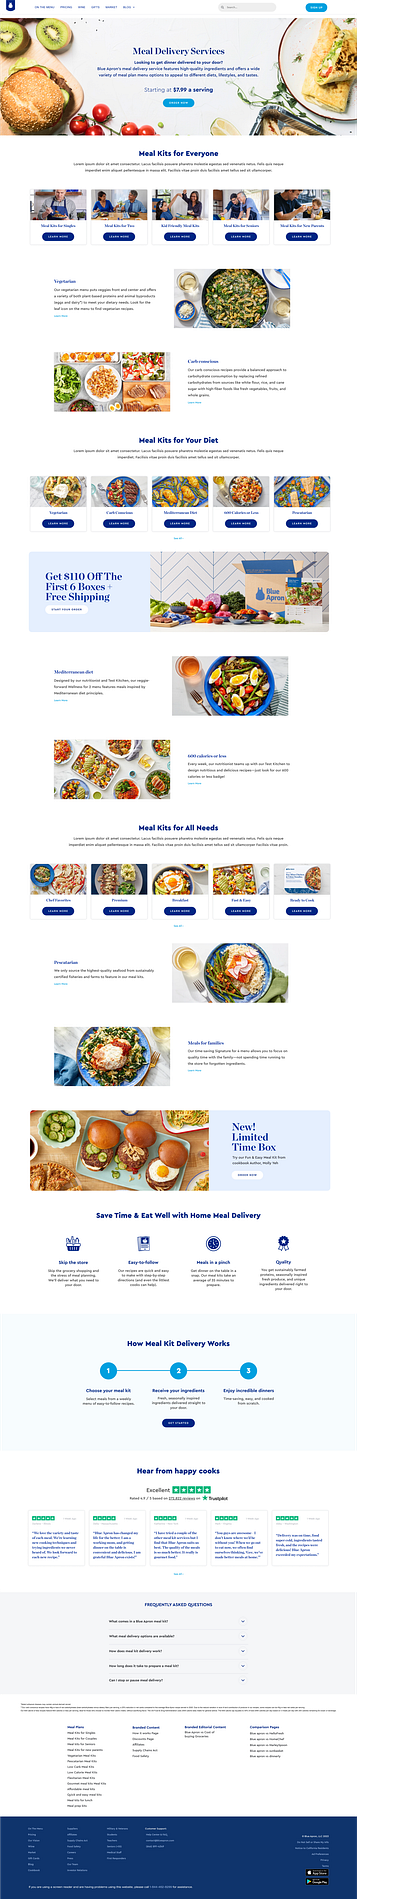 Blue Apron Meal Delivery Services Page